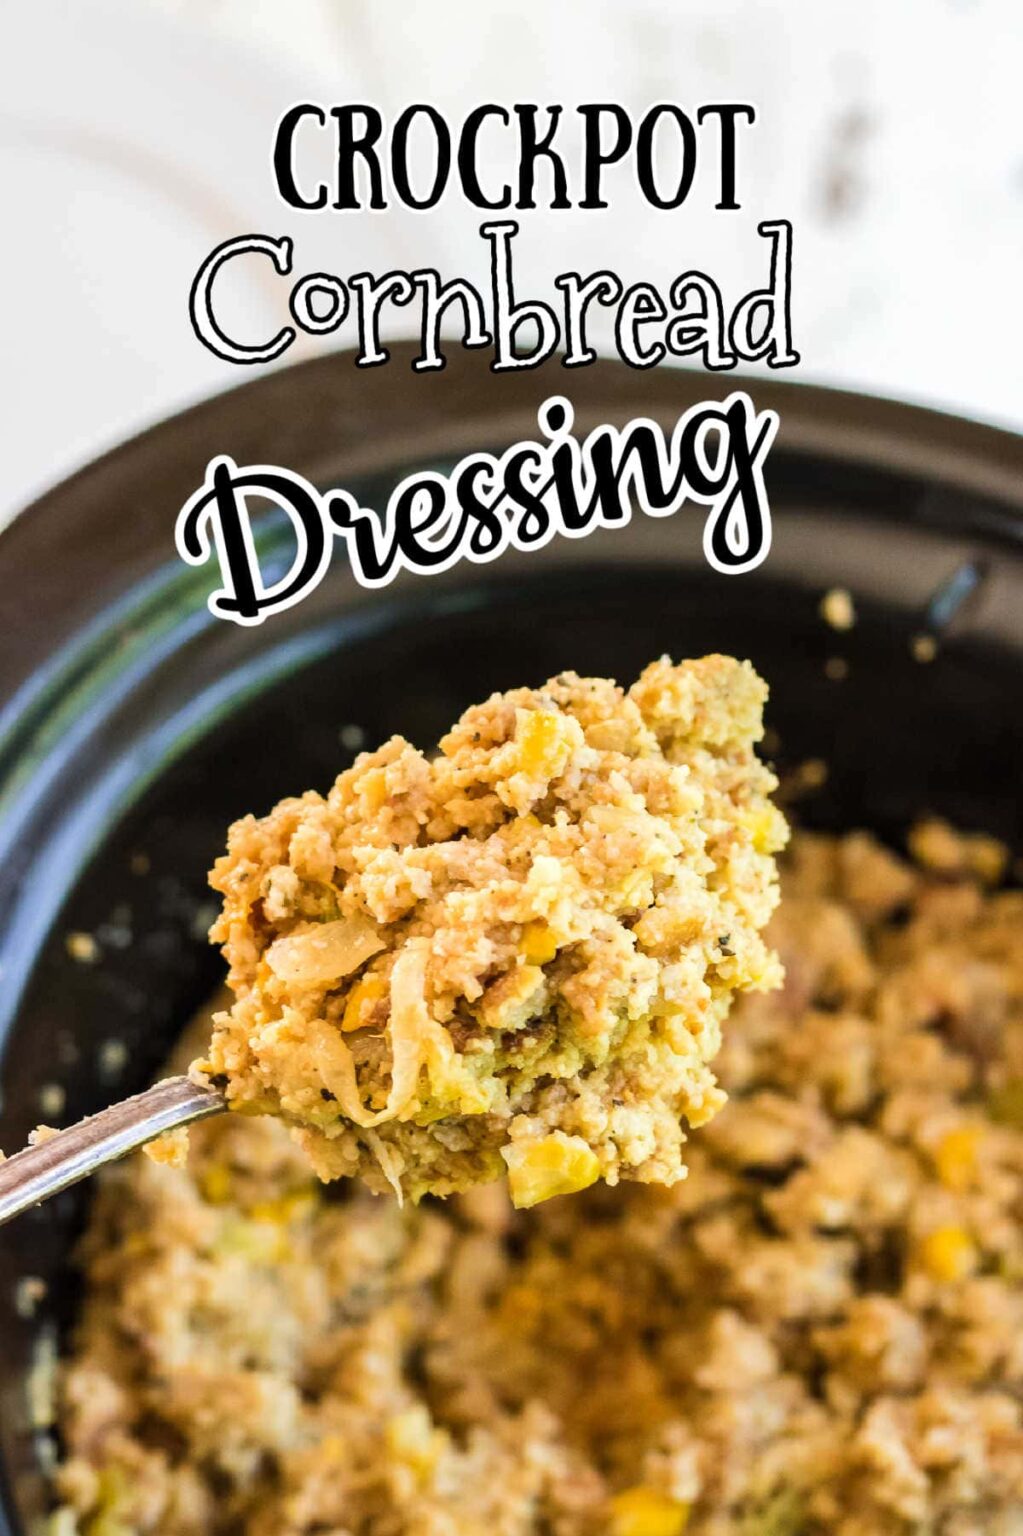 Southern Cornbread Dressing Recipe In the Crockpot - Restless Chipotle